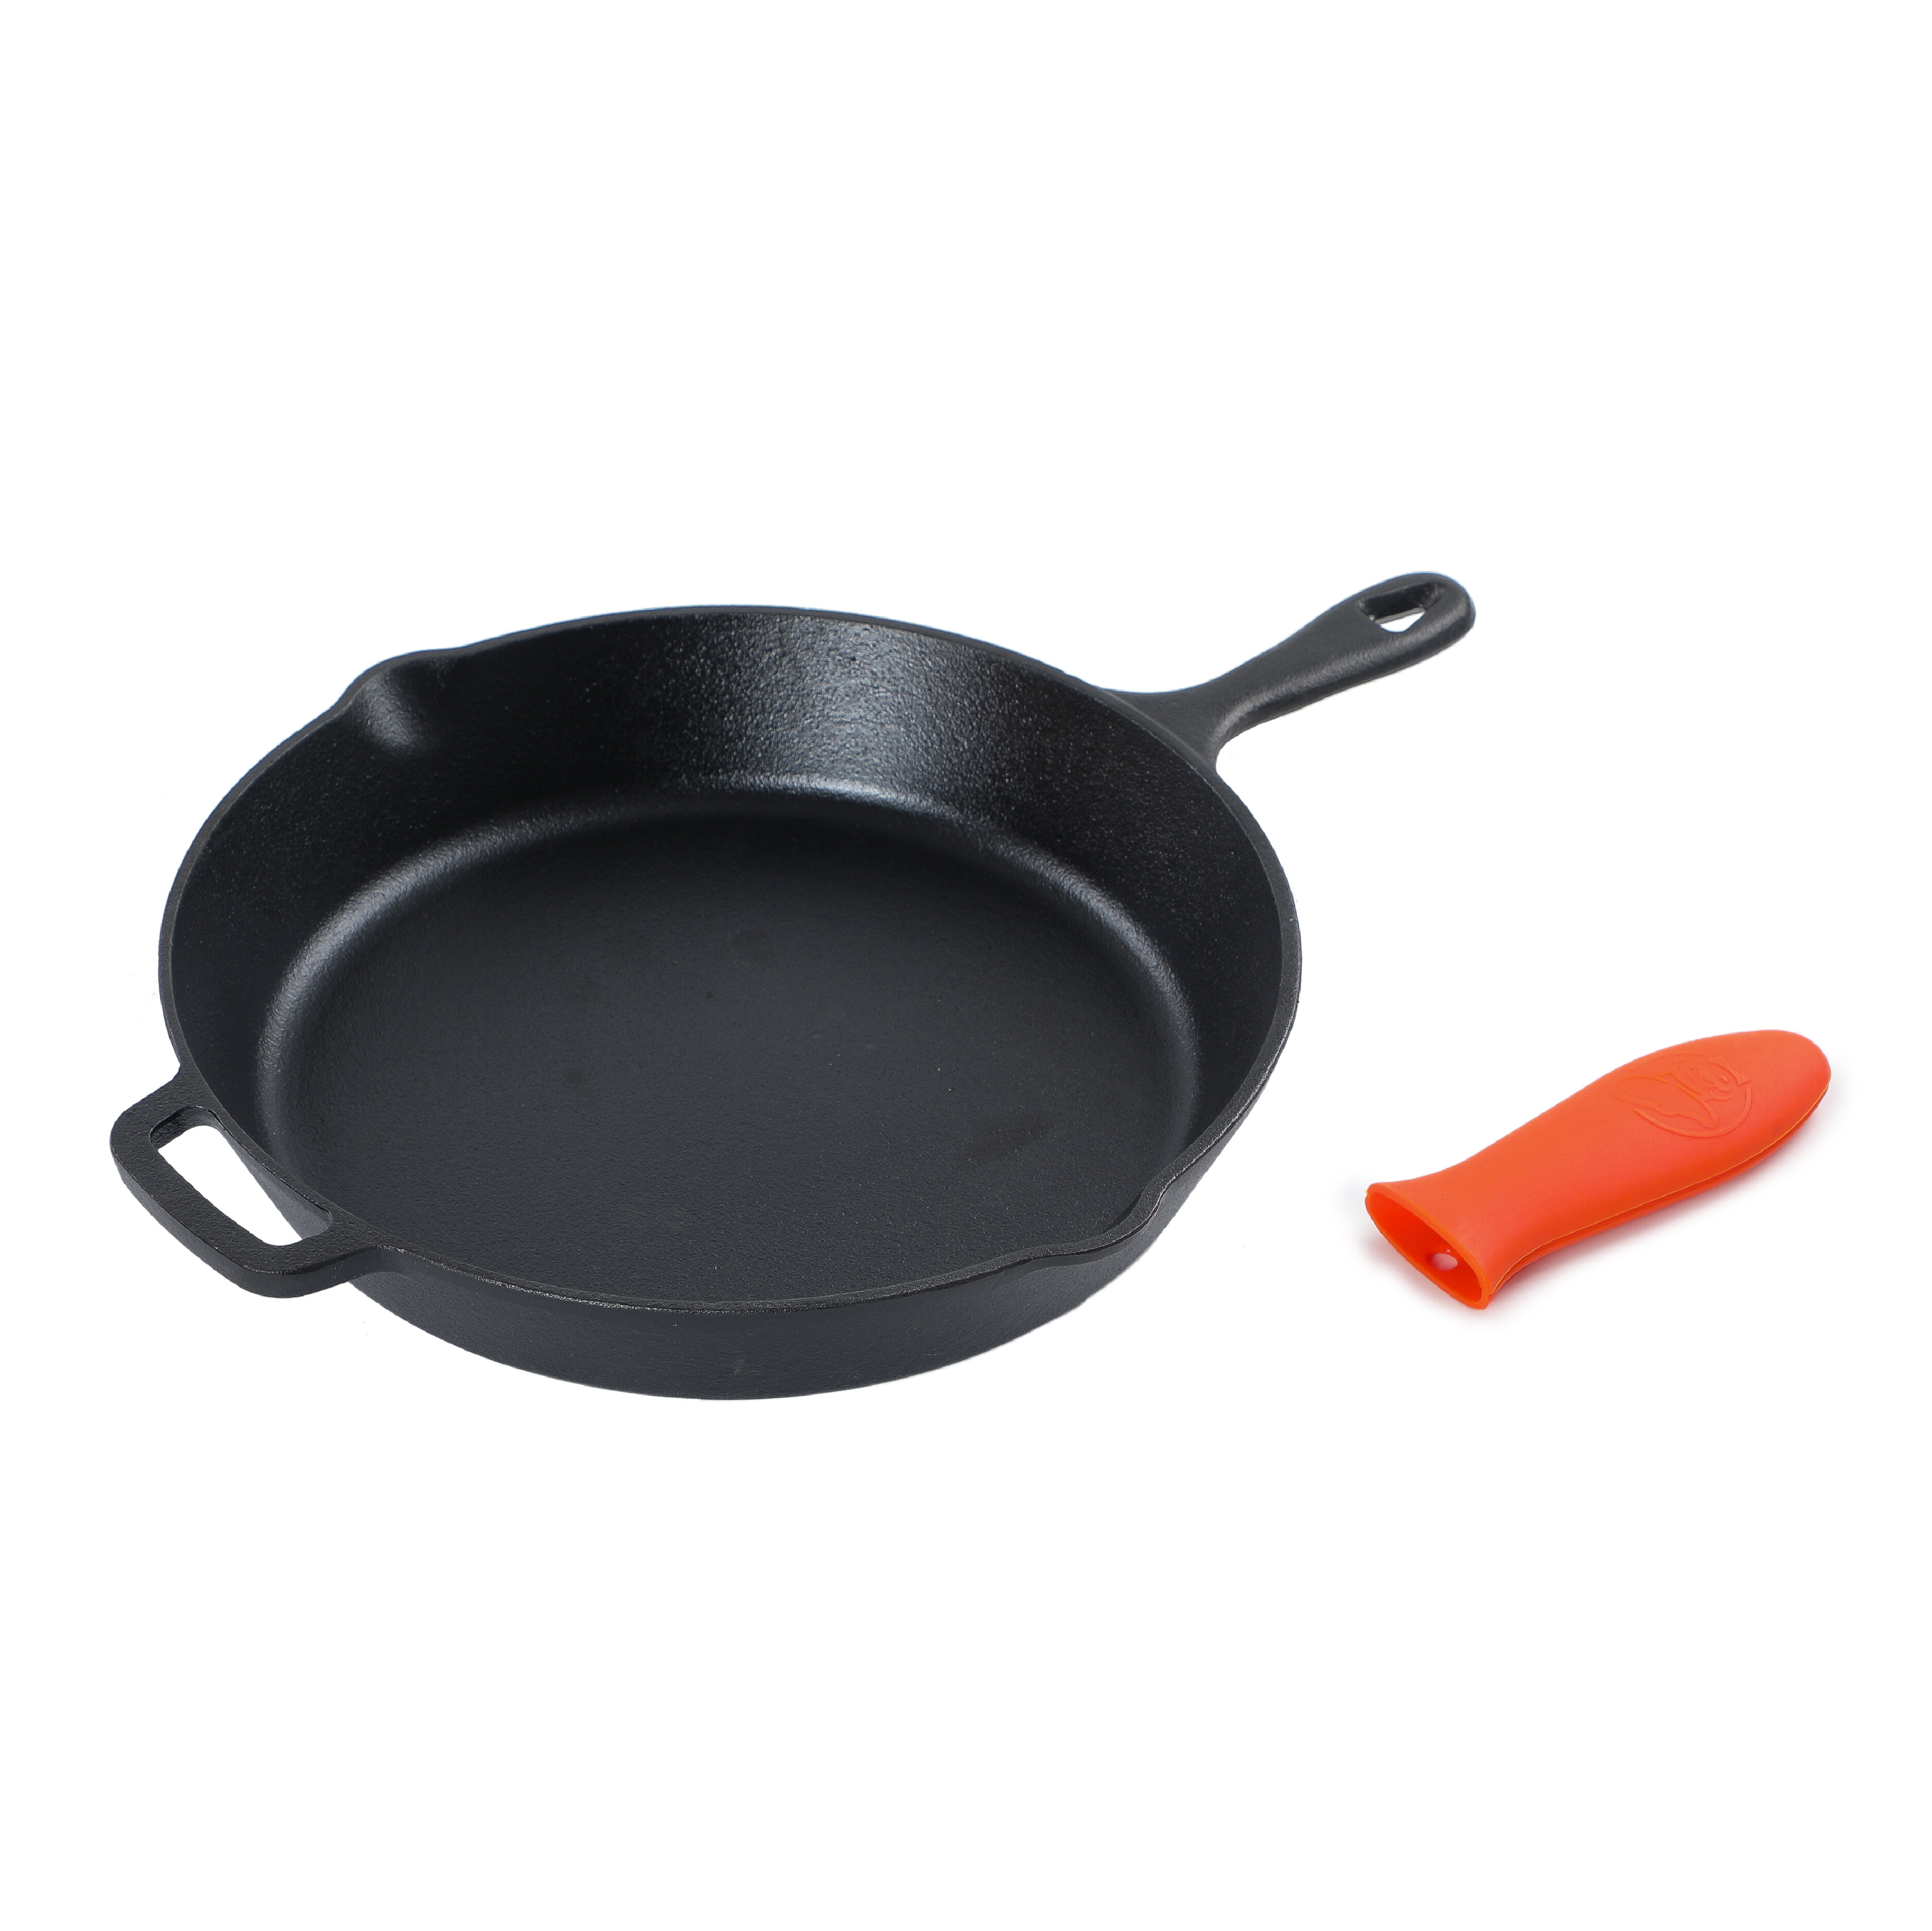 Cast Iron Skillet - 10-Inch Frying Pan with Pour Spouts + Silicone  Heat-Resistant Handle Cover Holder - Pre-Seasoned Oven Safe Cookware 